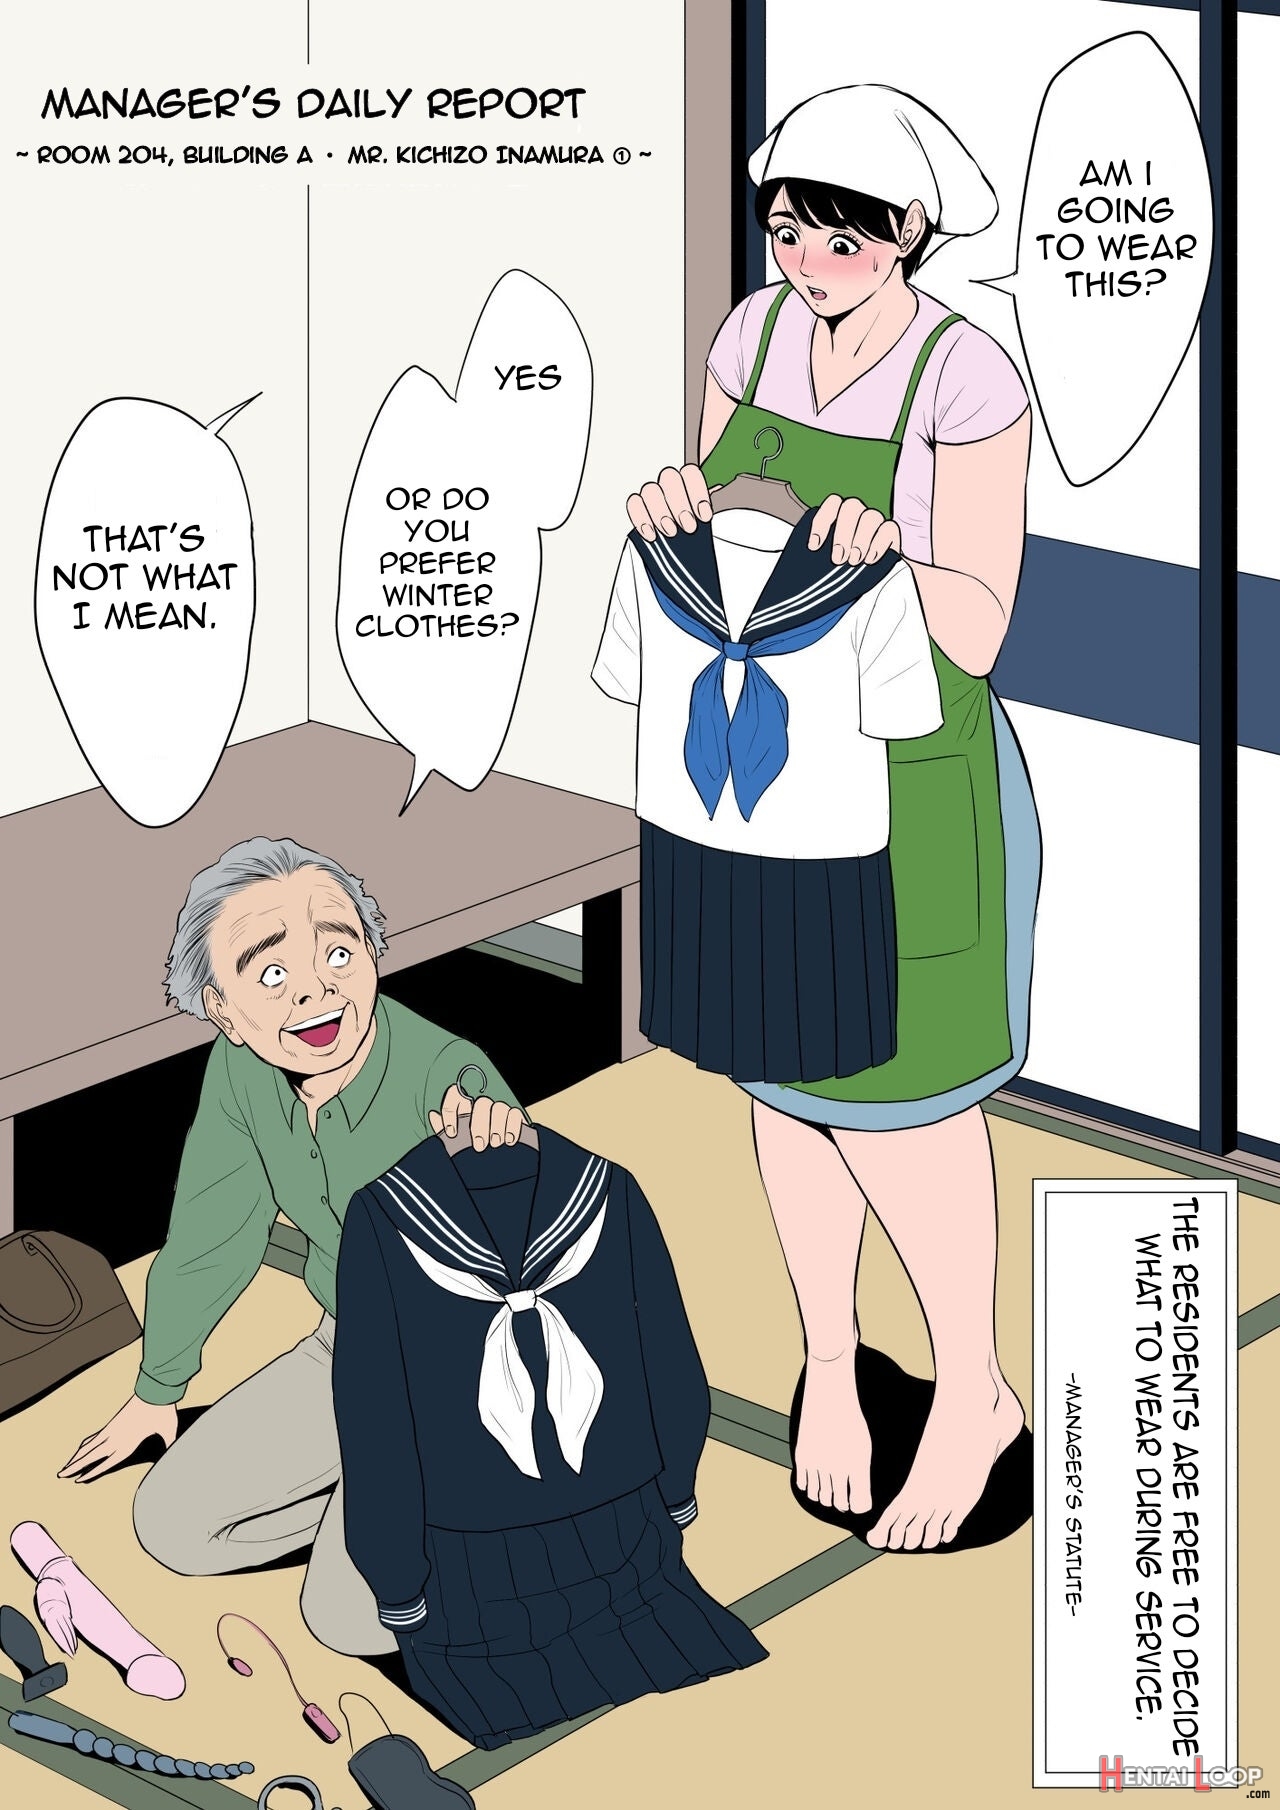 Manager's Daily Work Report - Ward A, Room 204, Kichizo Inamura. page 1